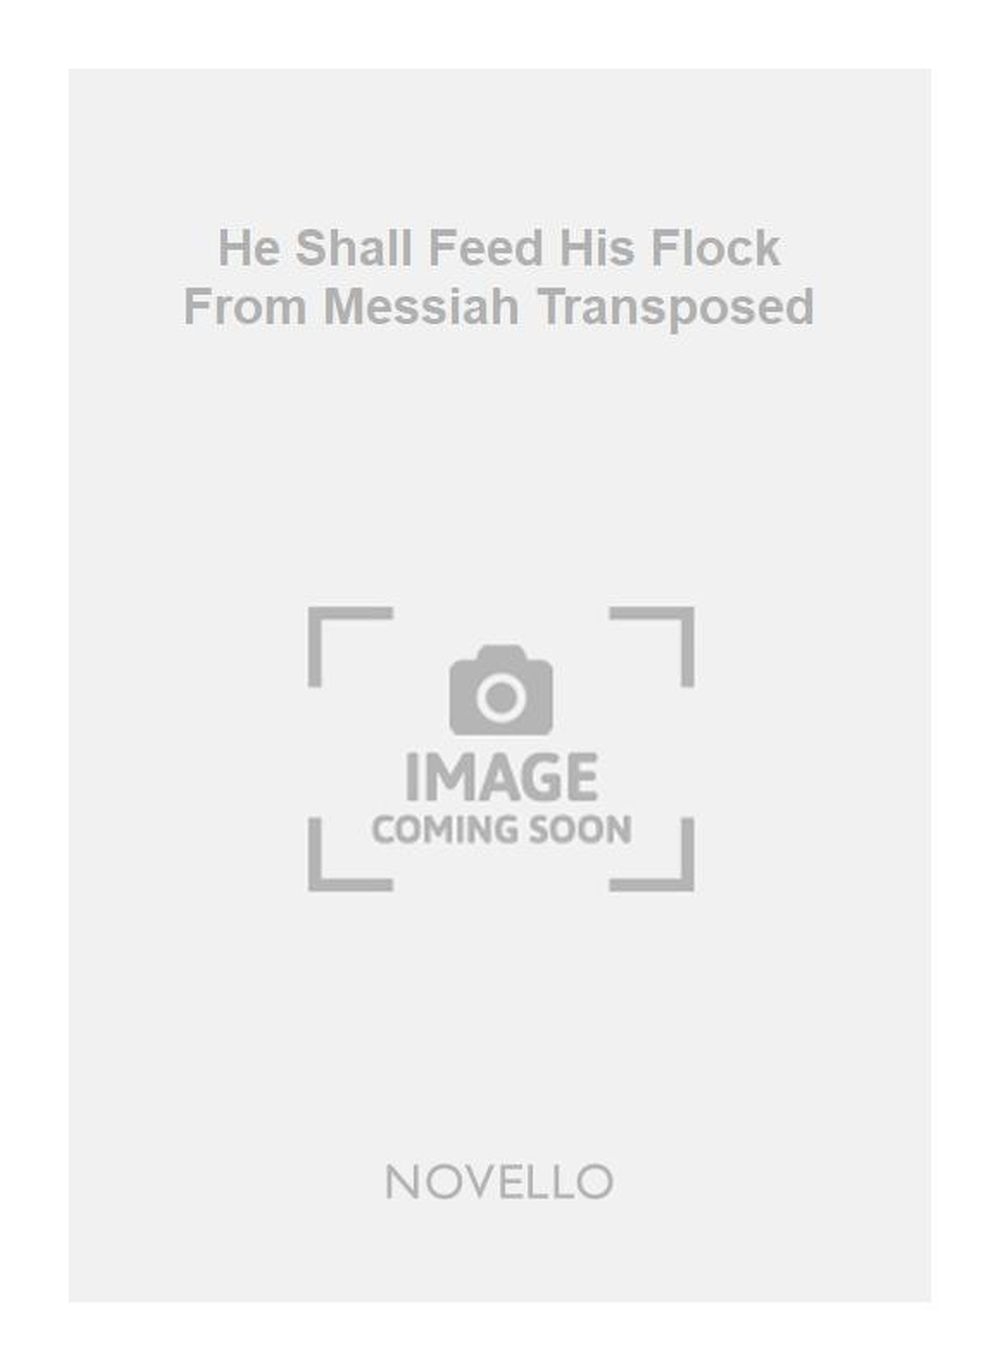 Georg Friedrich Hndel: He Shall Feed His Flock From Messiah Transposed